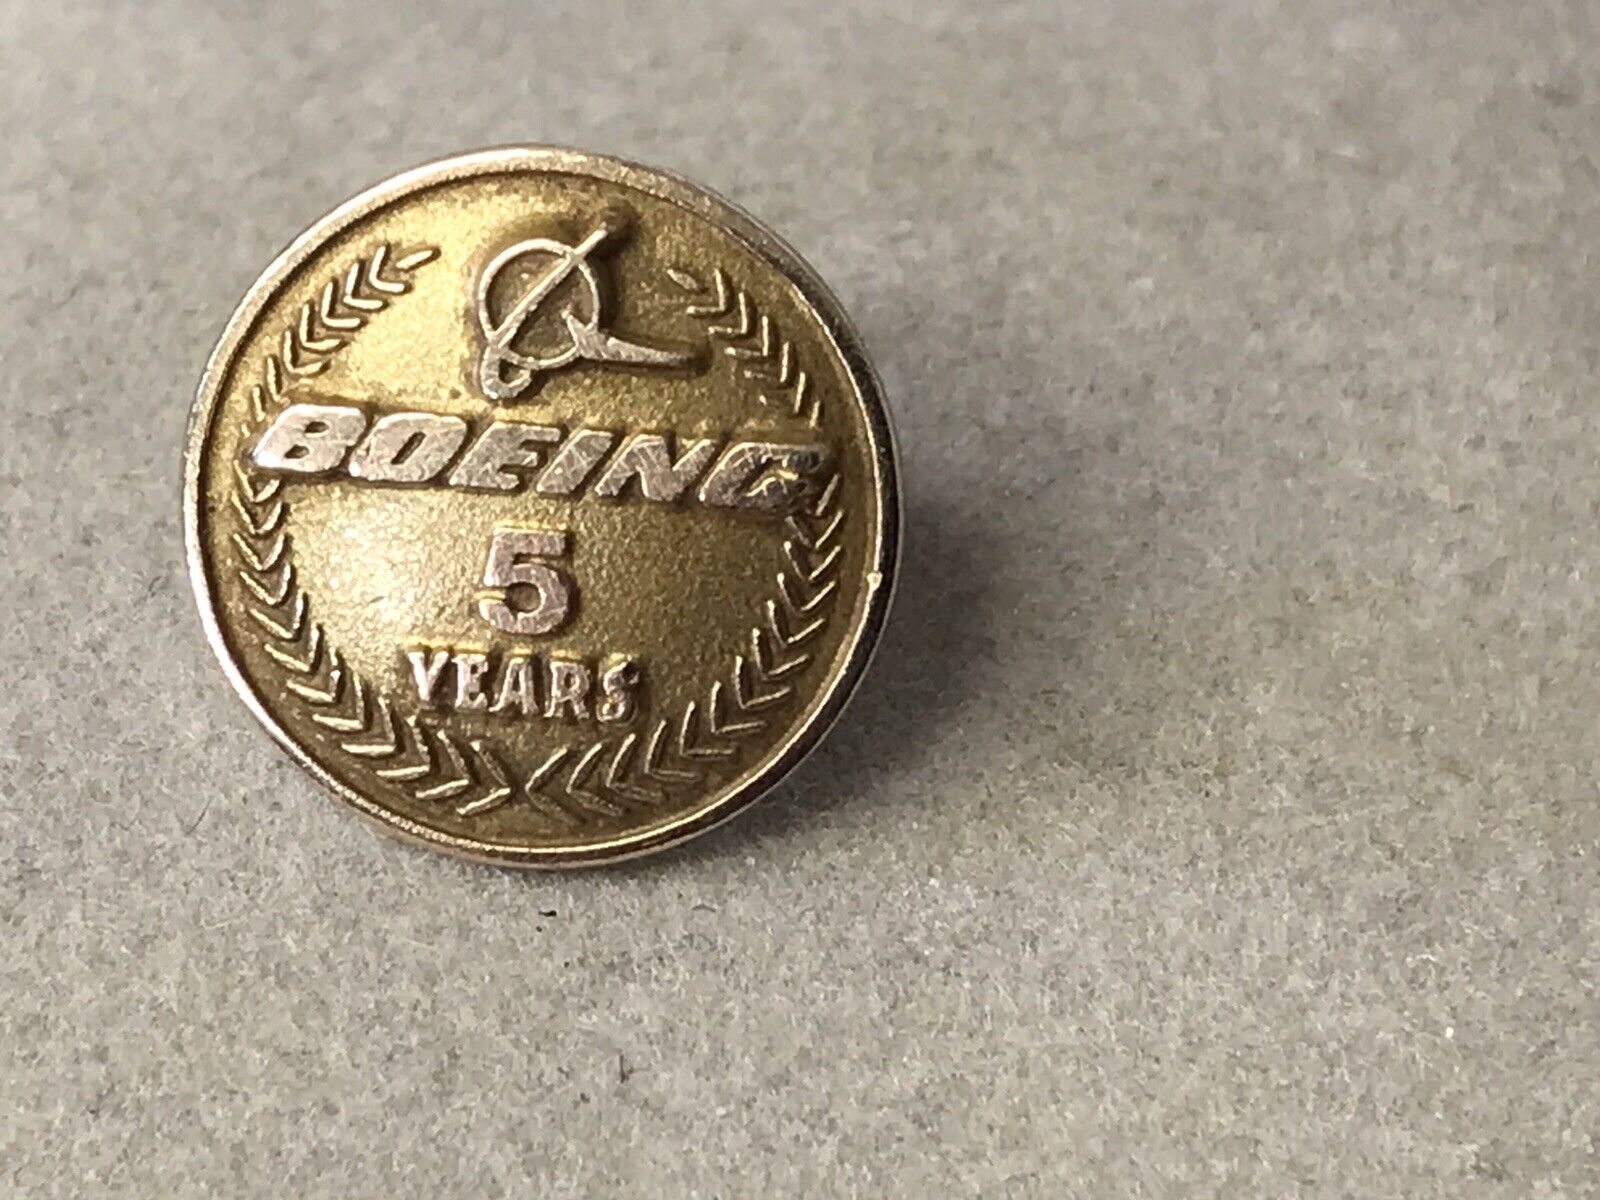 Boeing Aircraft Gold Filled 5 years Service older Screwback pin